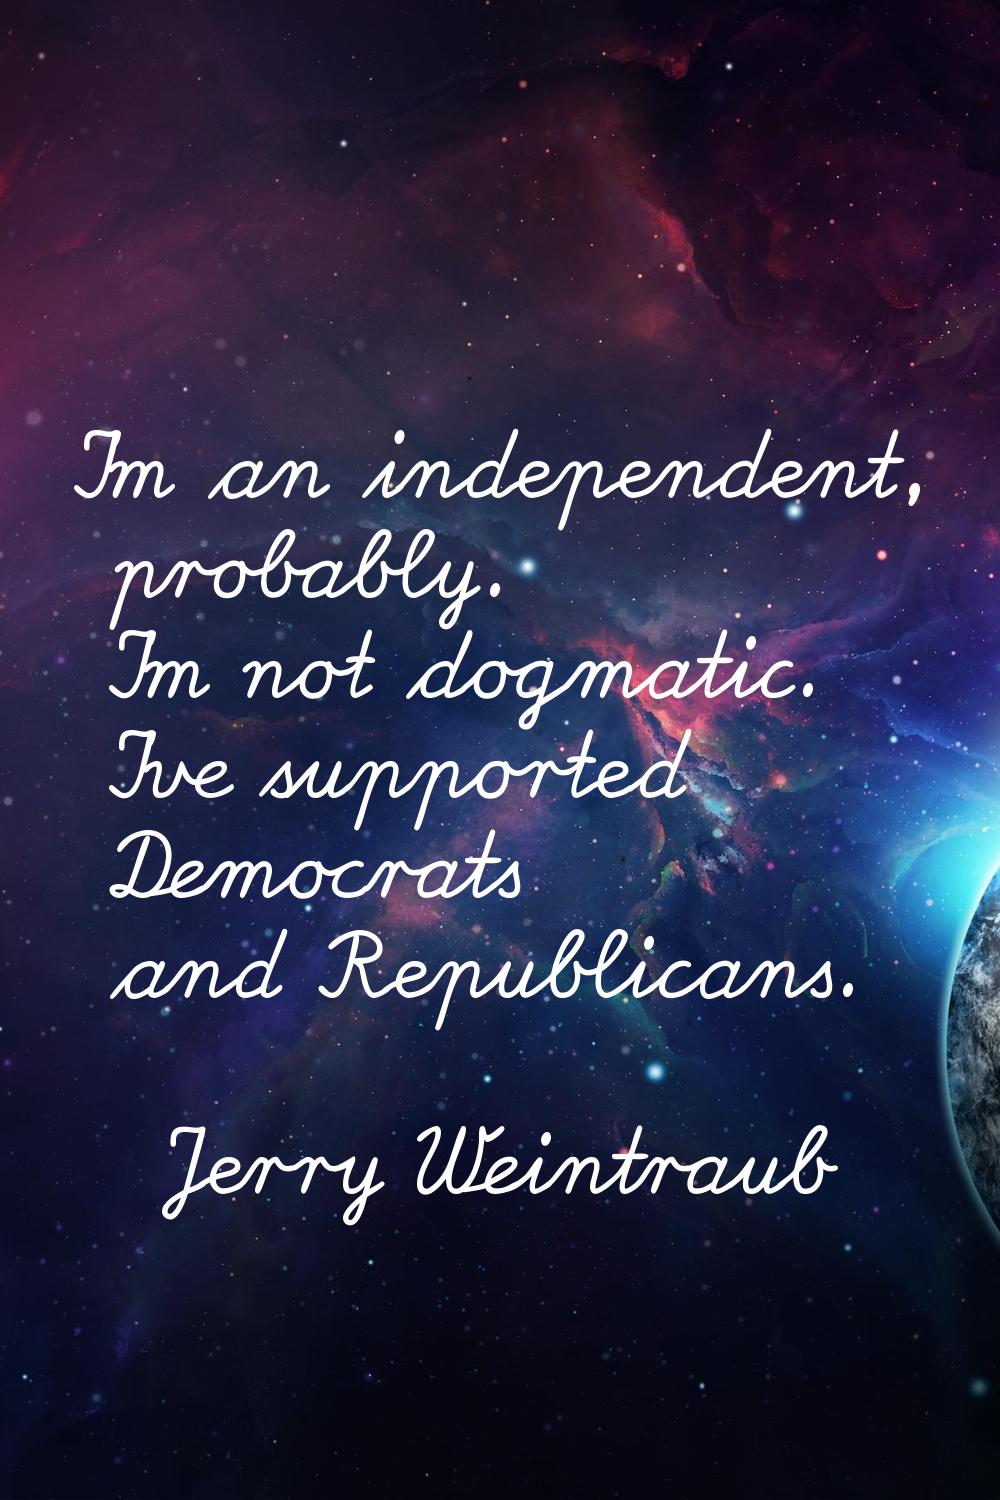 I'm an independent, probably. I'm not dogmatic. I've supported Democrats and Republicans.